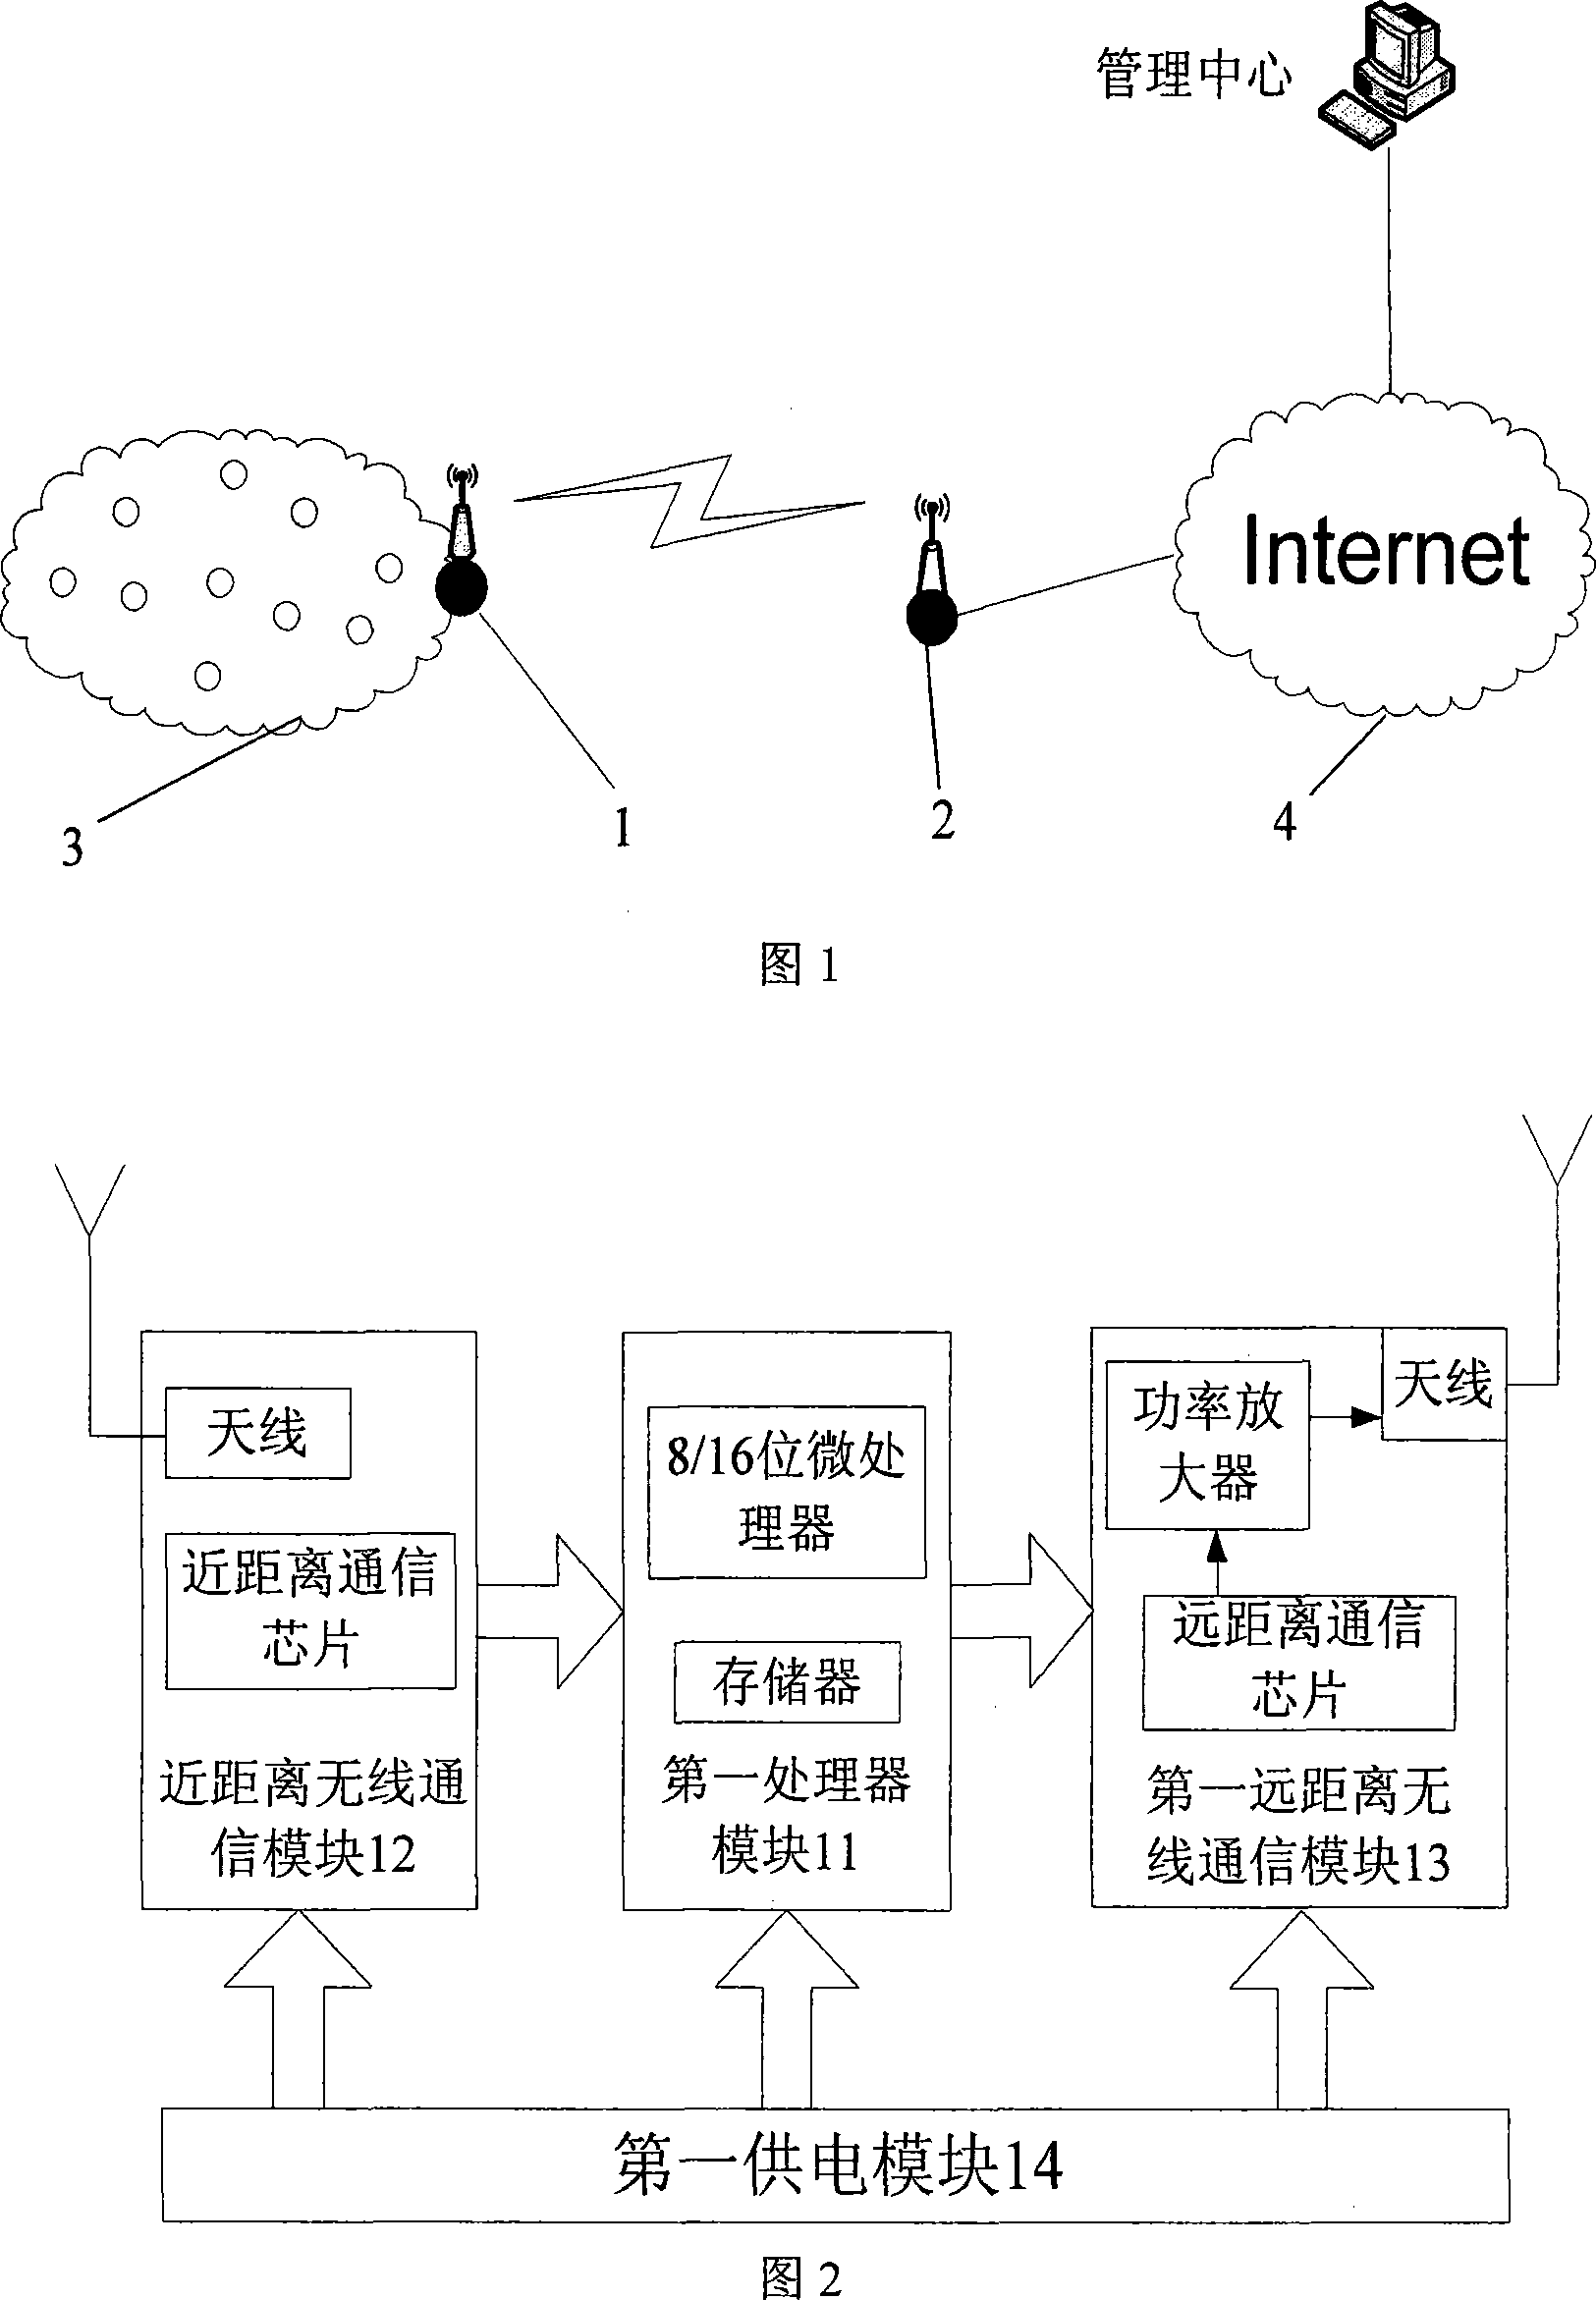 Connection device and method between wireless sensor network and Internet